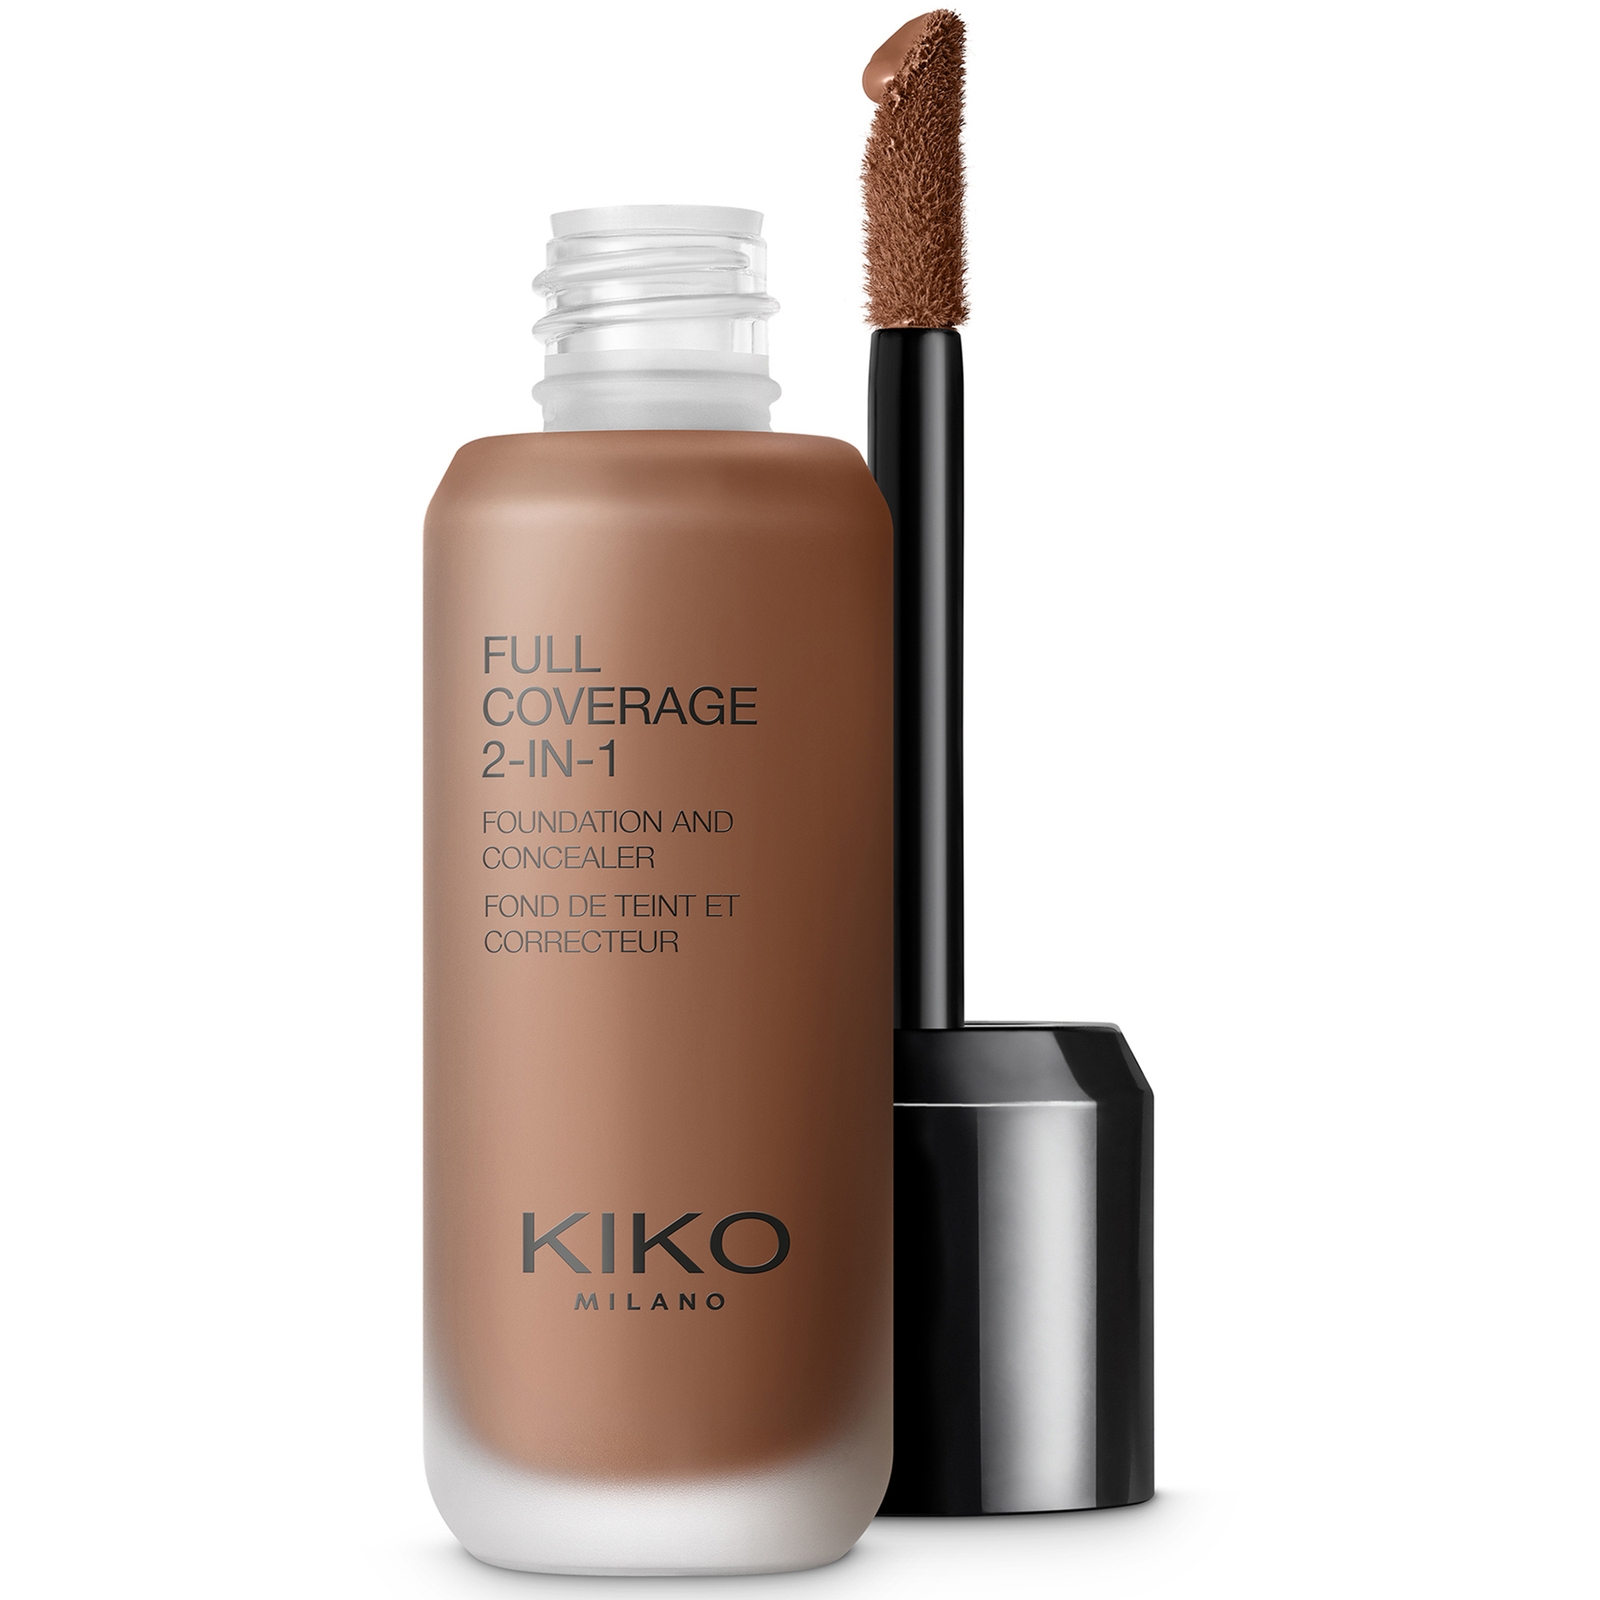 KIKO Milano Full Coverage 2-in-1 Foundation and Concealer 25ml (Various Shades) - 180 Rose